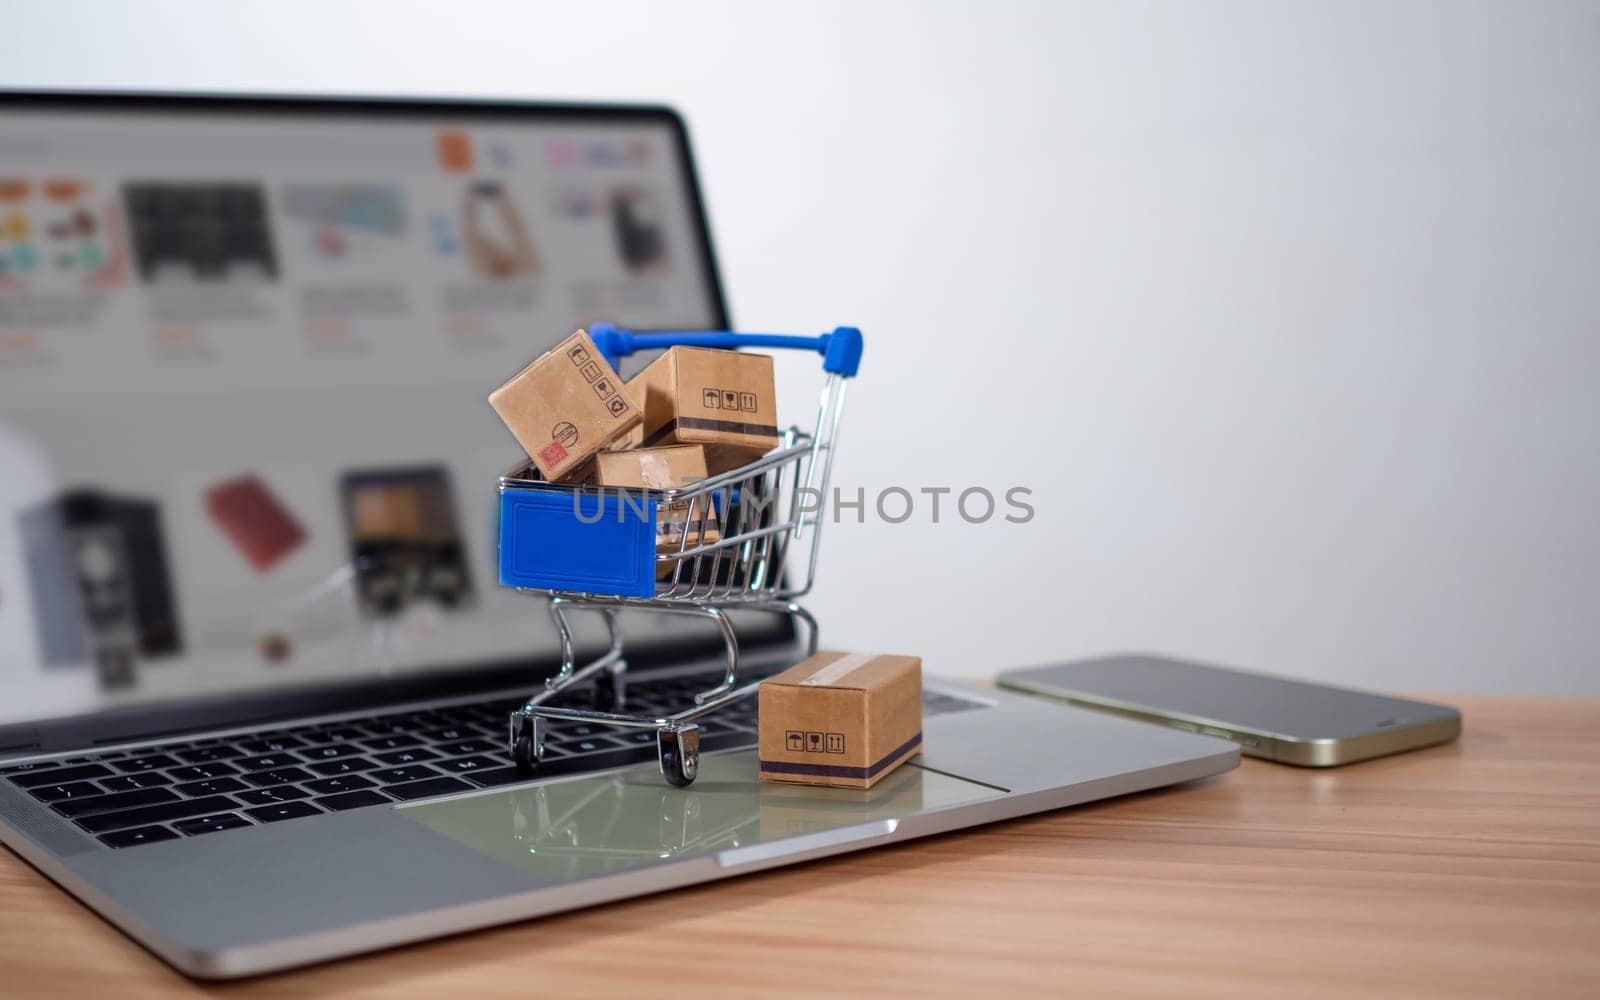 Shopping cart and product boxes placed on laptop computer represent online shopping concept, website, e-commerce, marketplace platform, technology, transportation, logistics and online payment concept. by Unimages2527